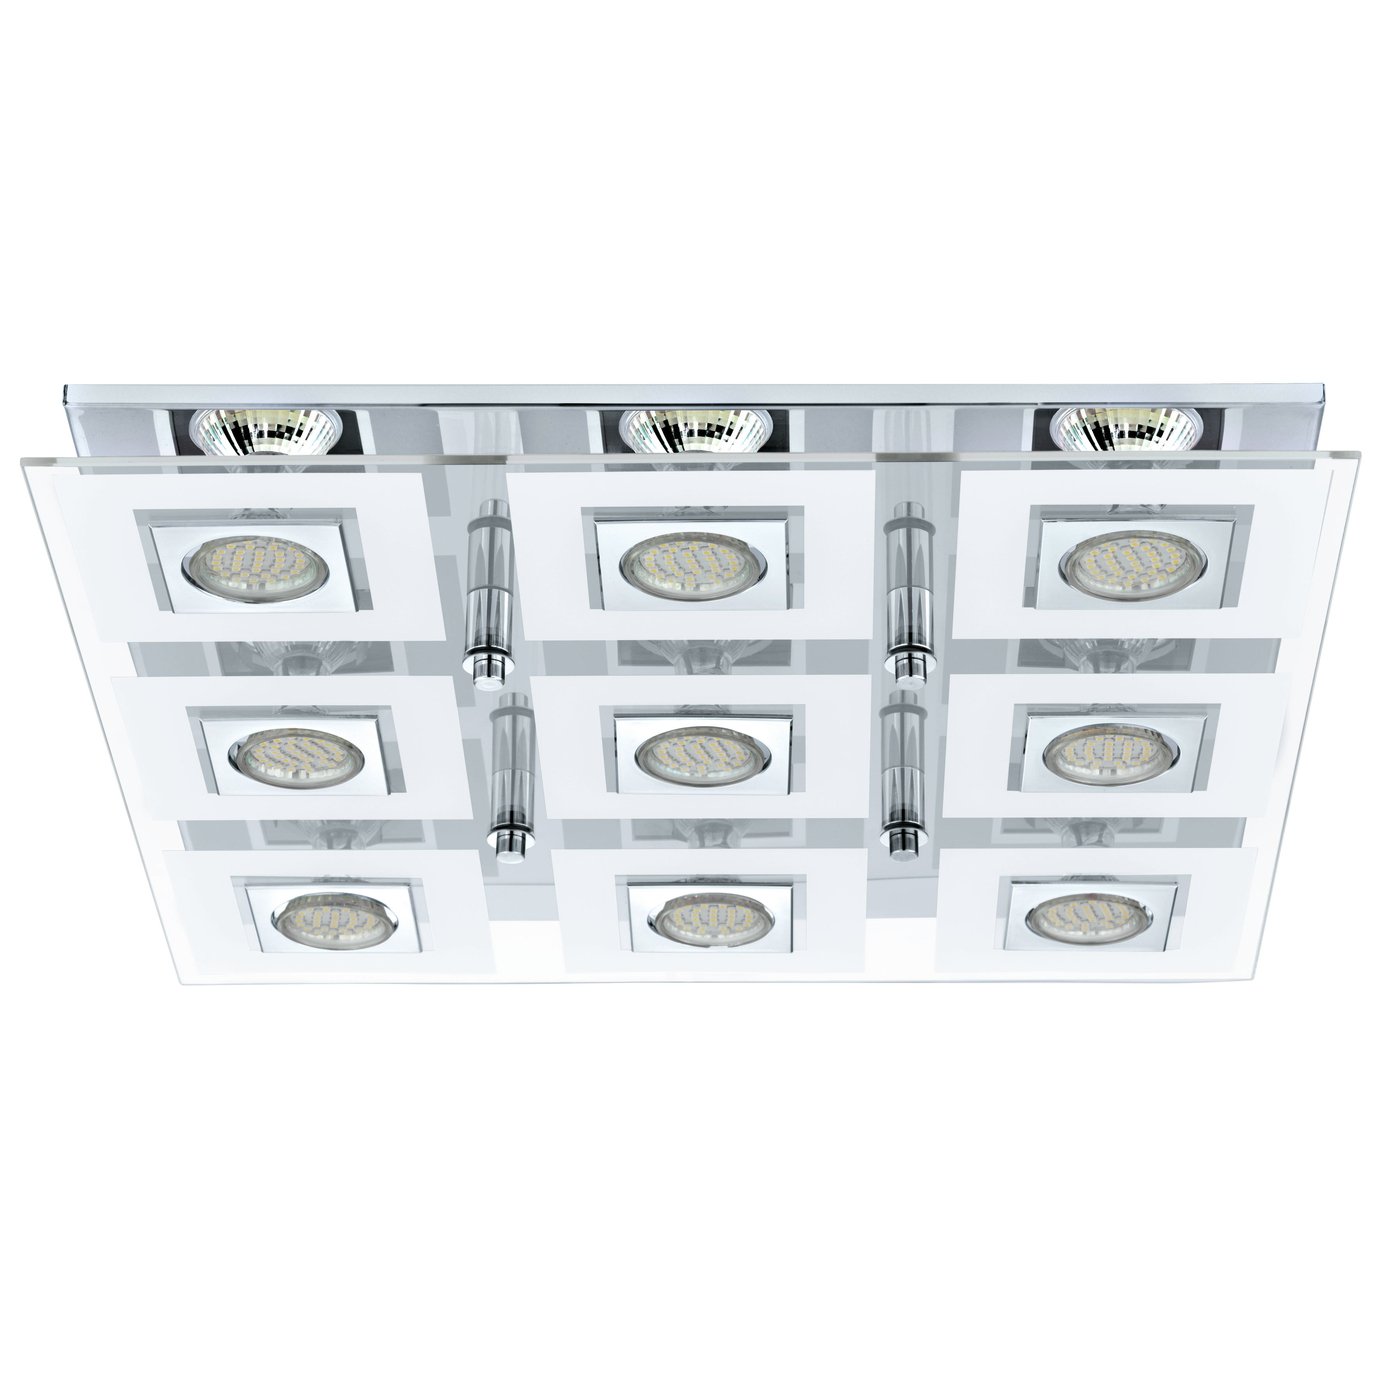 Eglo Cabo 9 Point Square LED Ceiling Light